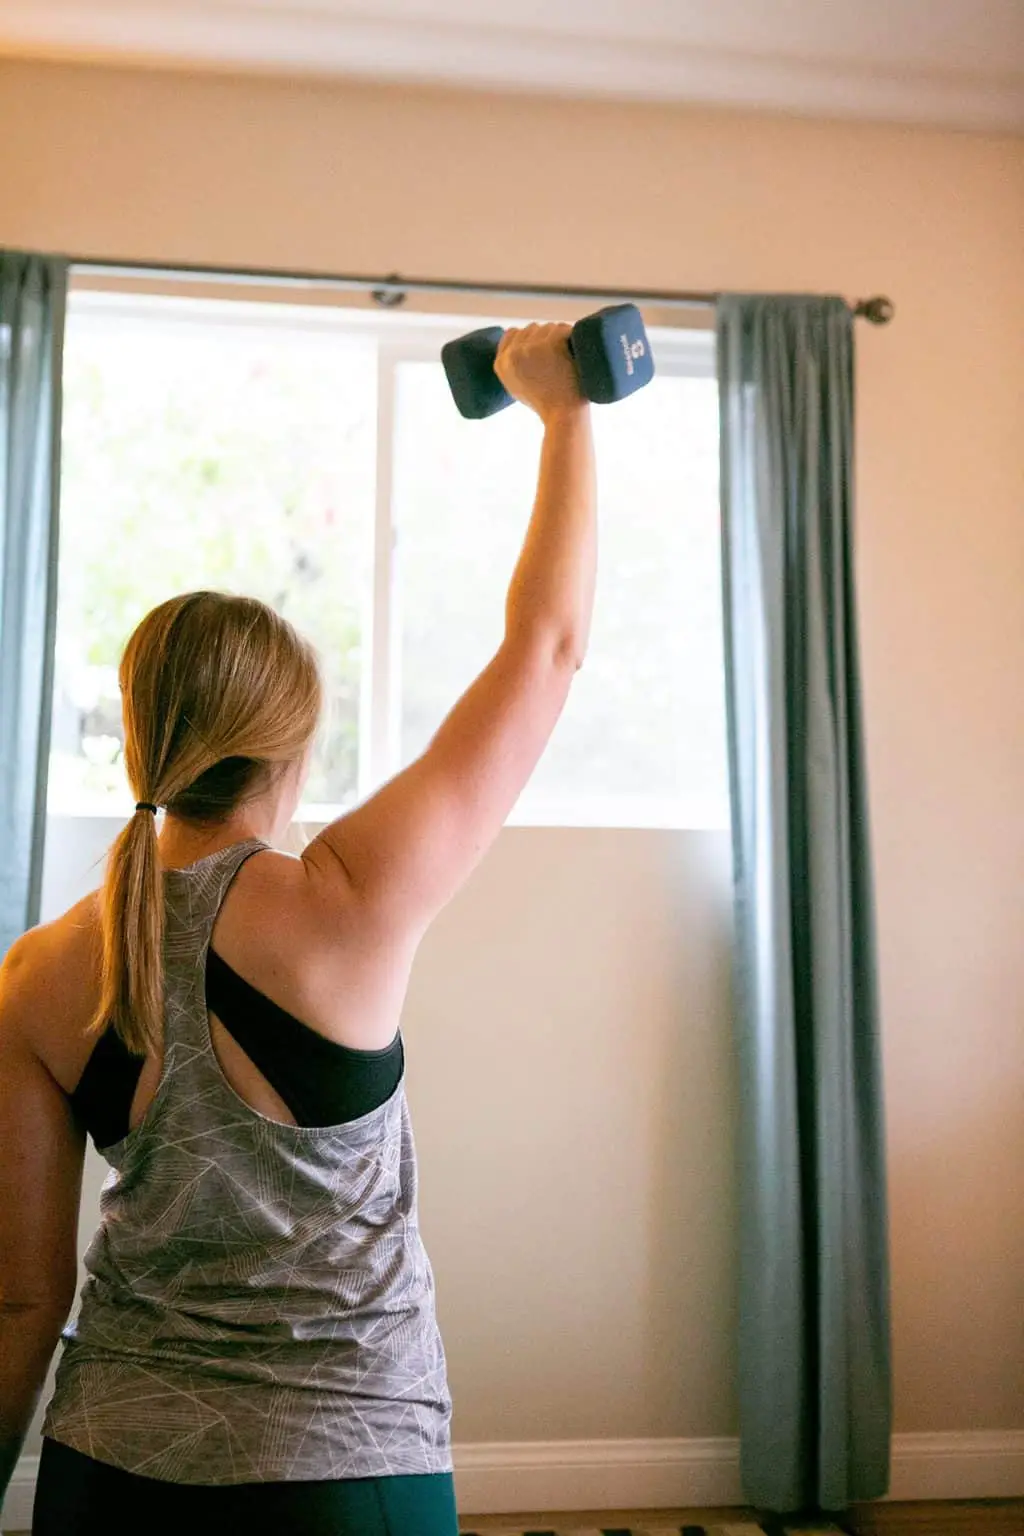 A woman lifting a dumbbell with one hand